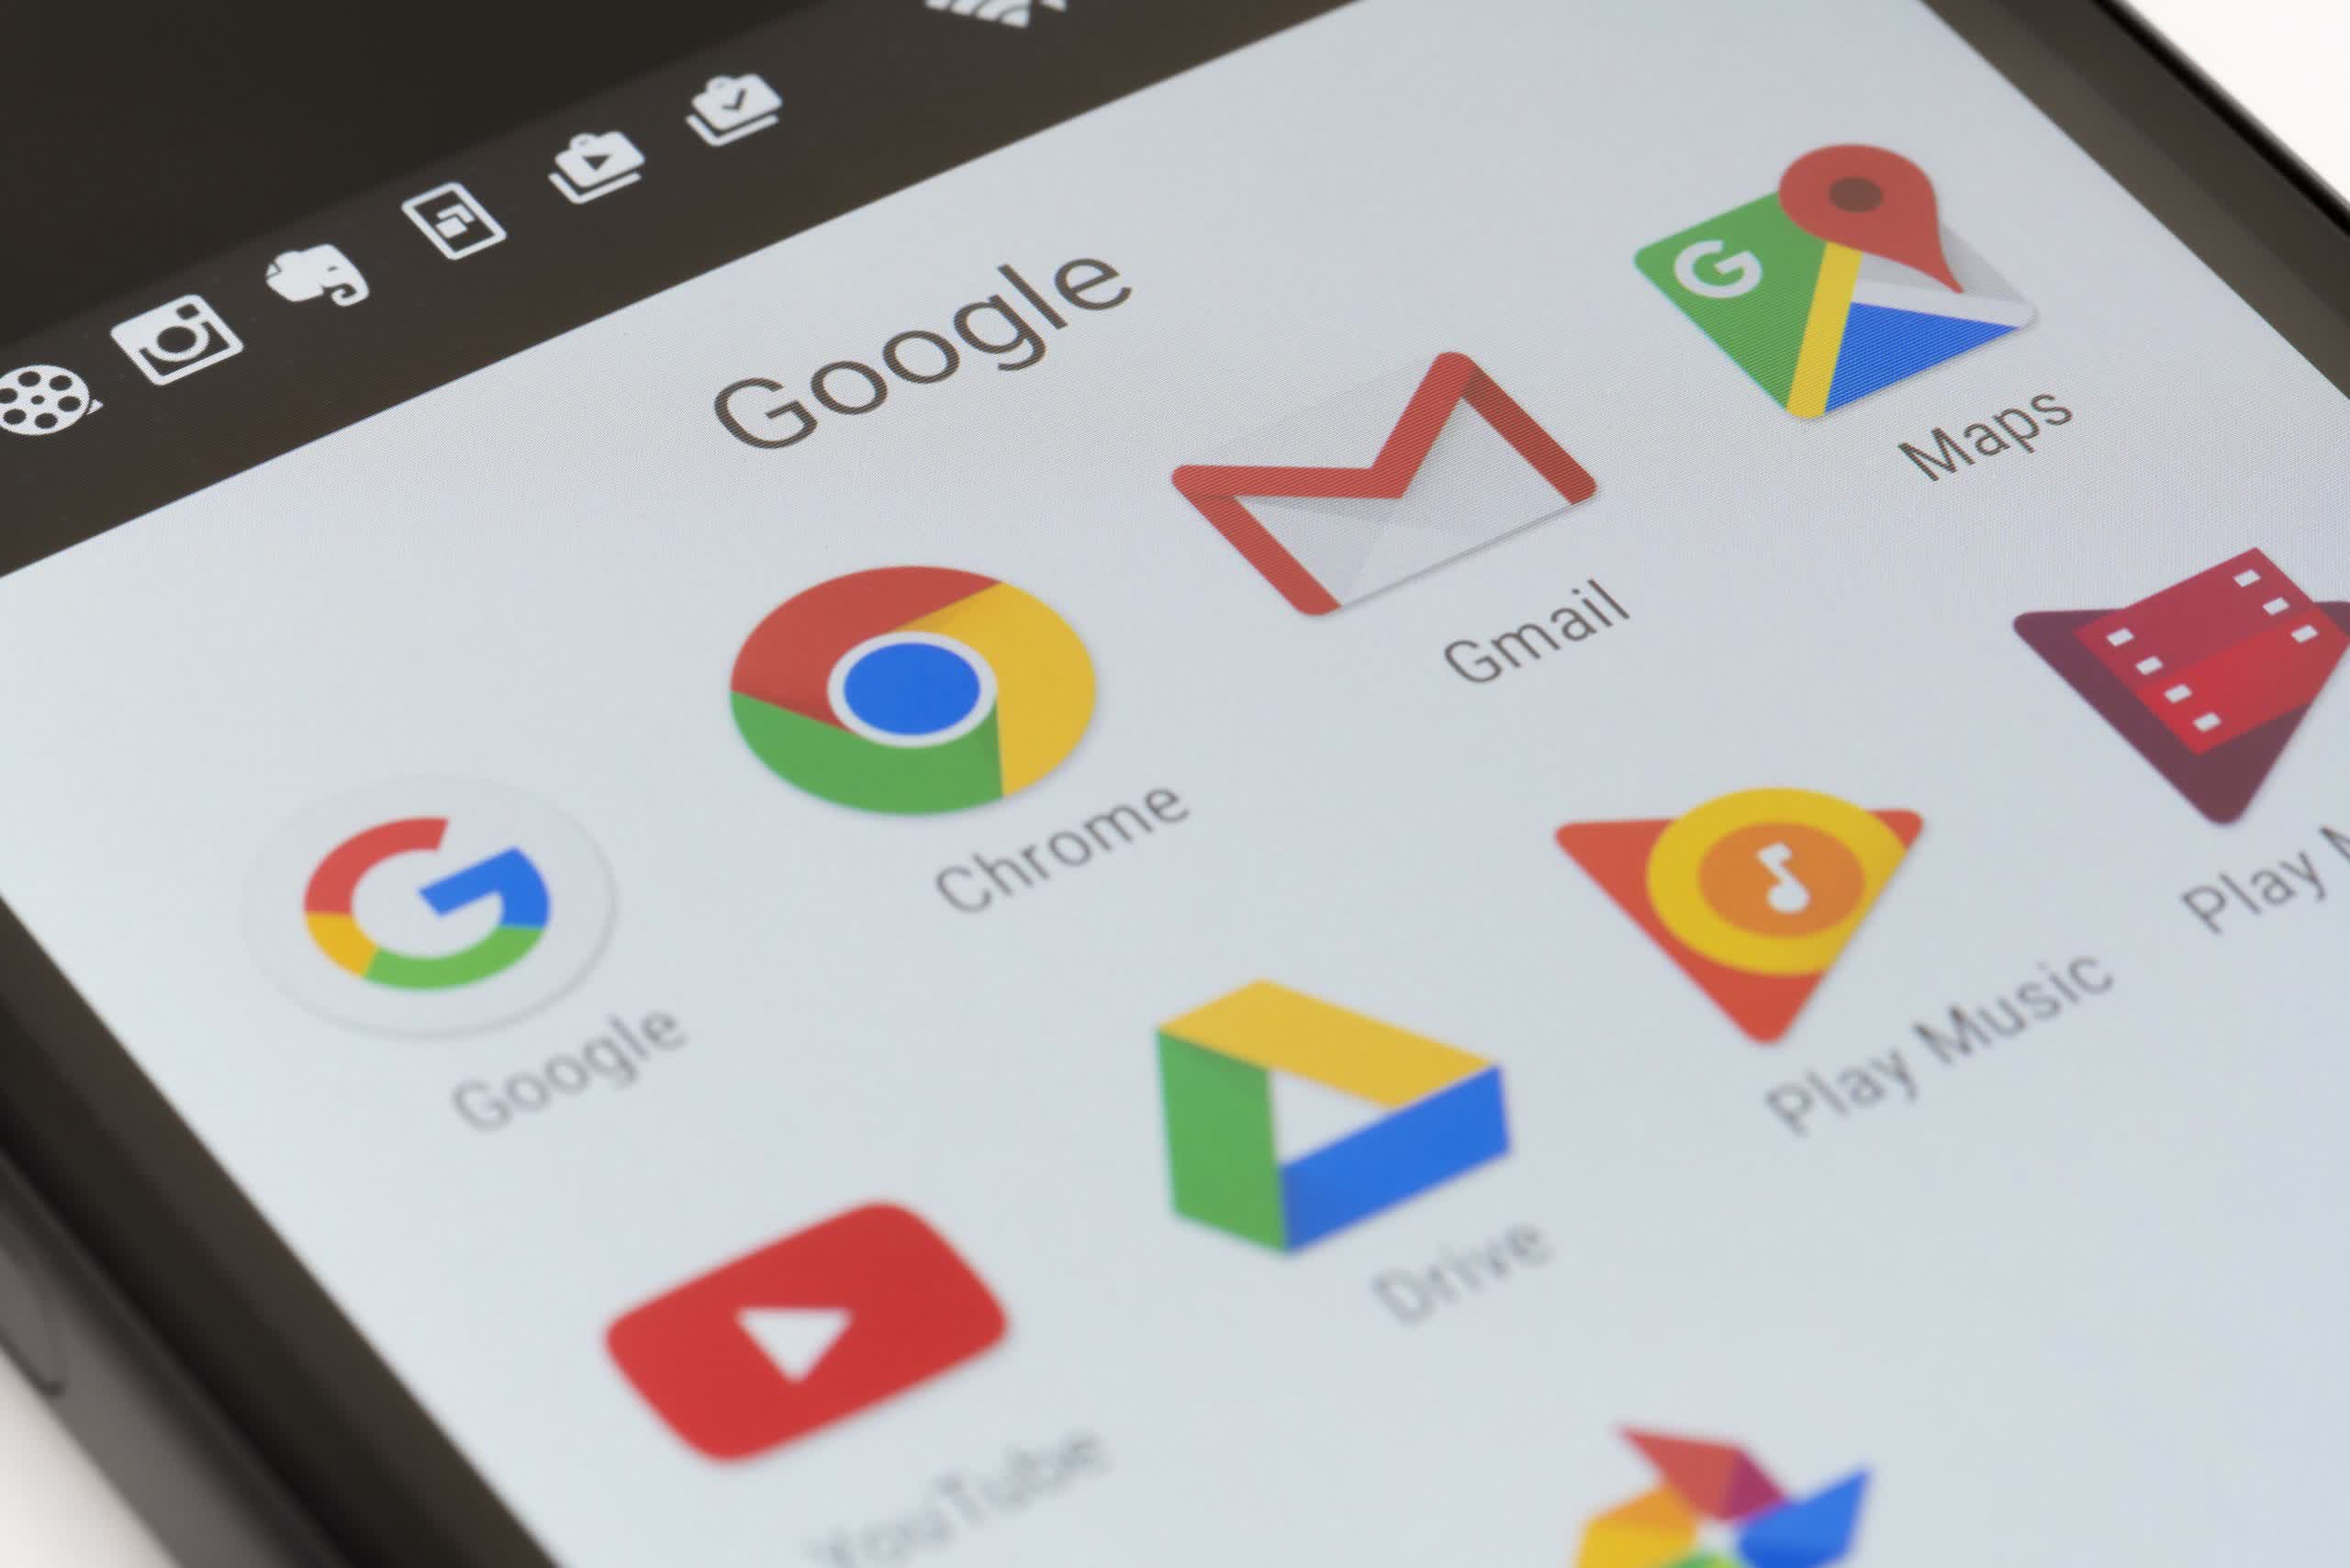 None of Google's apps have been updated since before Apple's privacy rules took effect